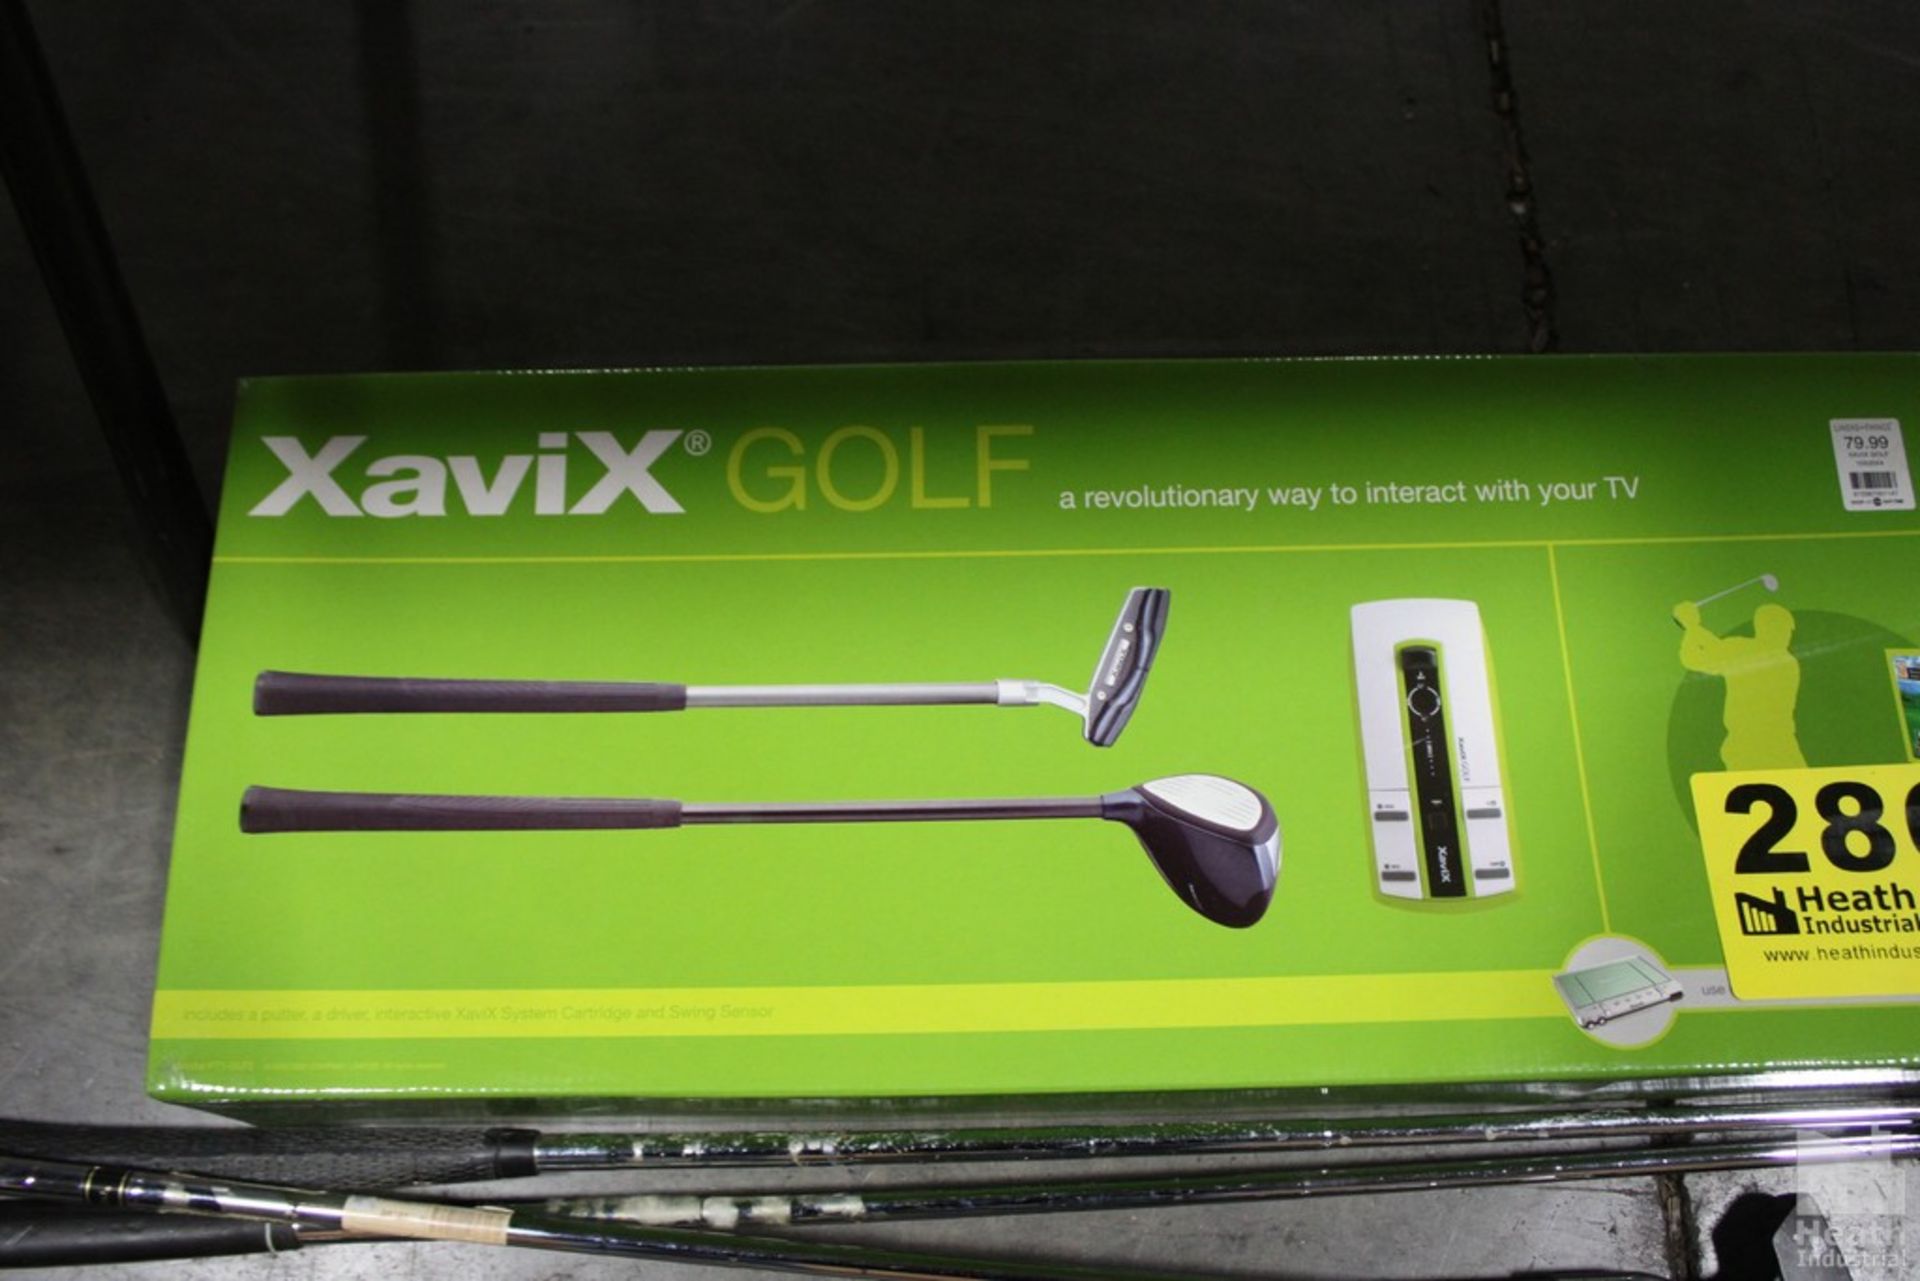 XAVIX TV INTERACTIVE GOLF KIT AND ASSORTED CLUBS - Image 3 of 3